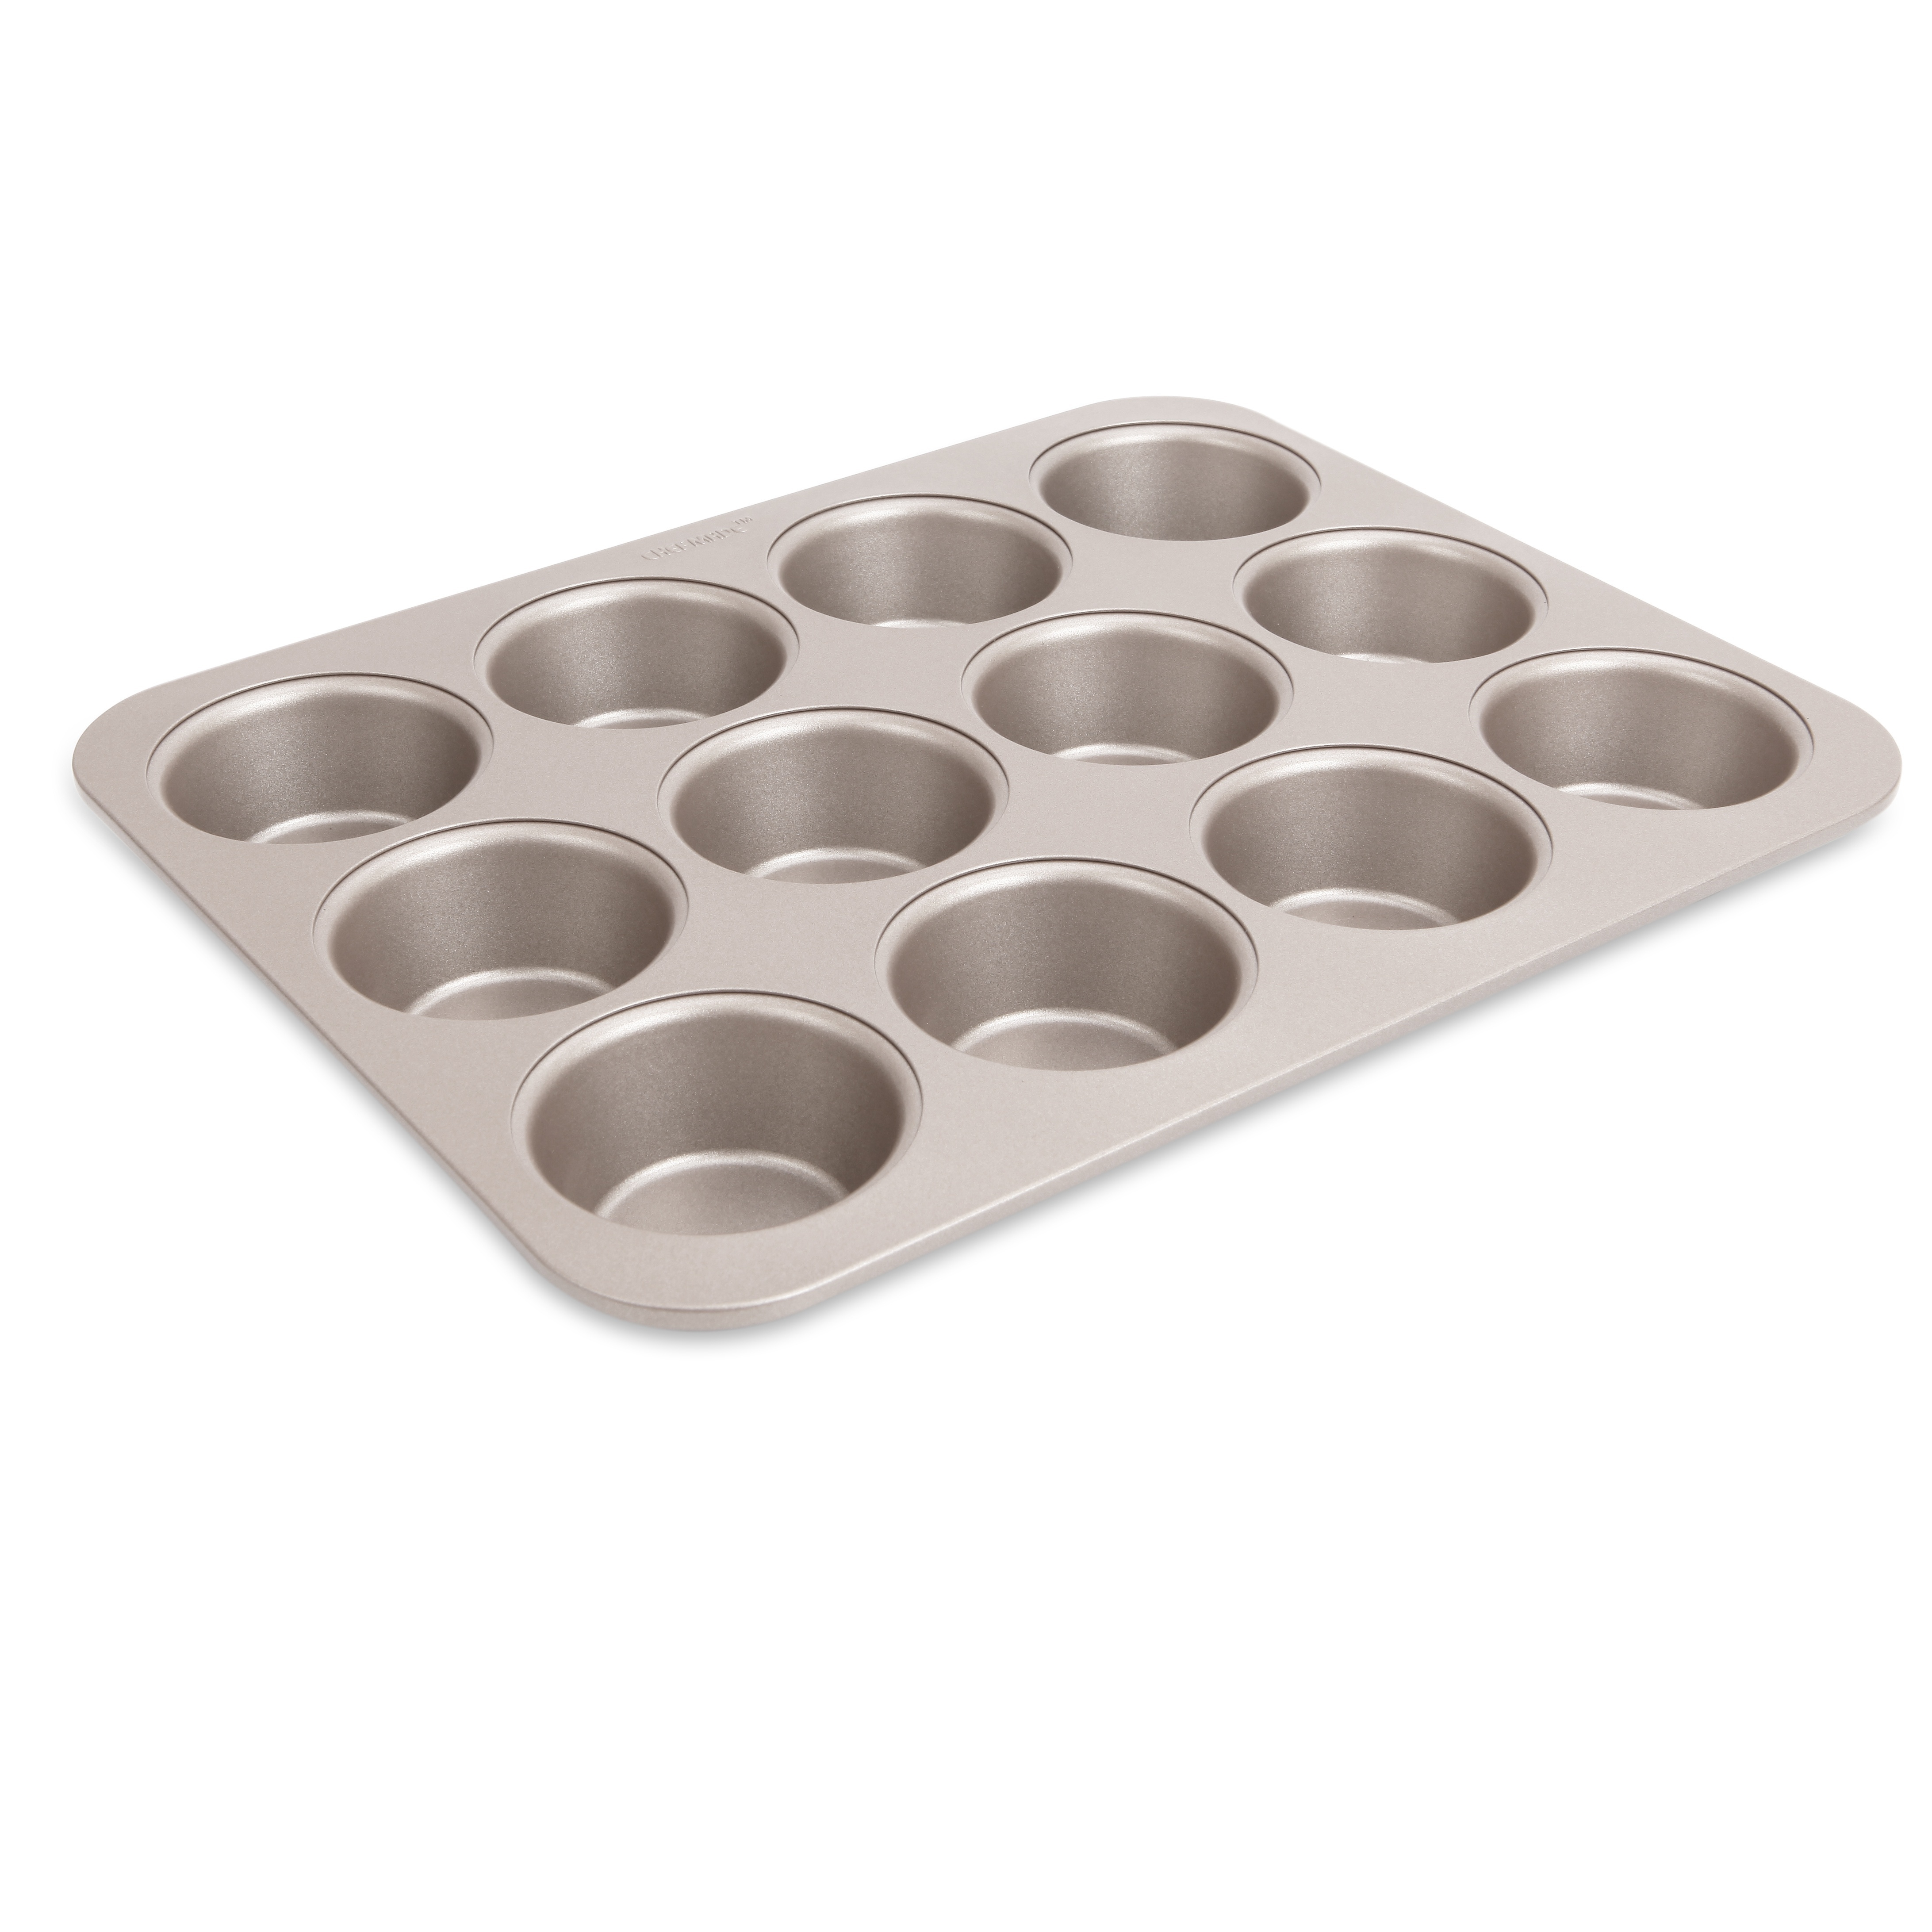 Muffin Pan - 12 Cup - Be Made